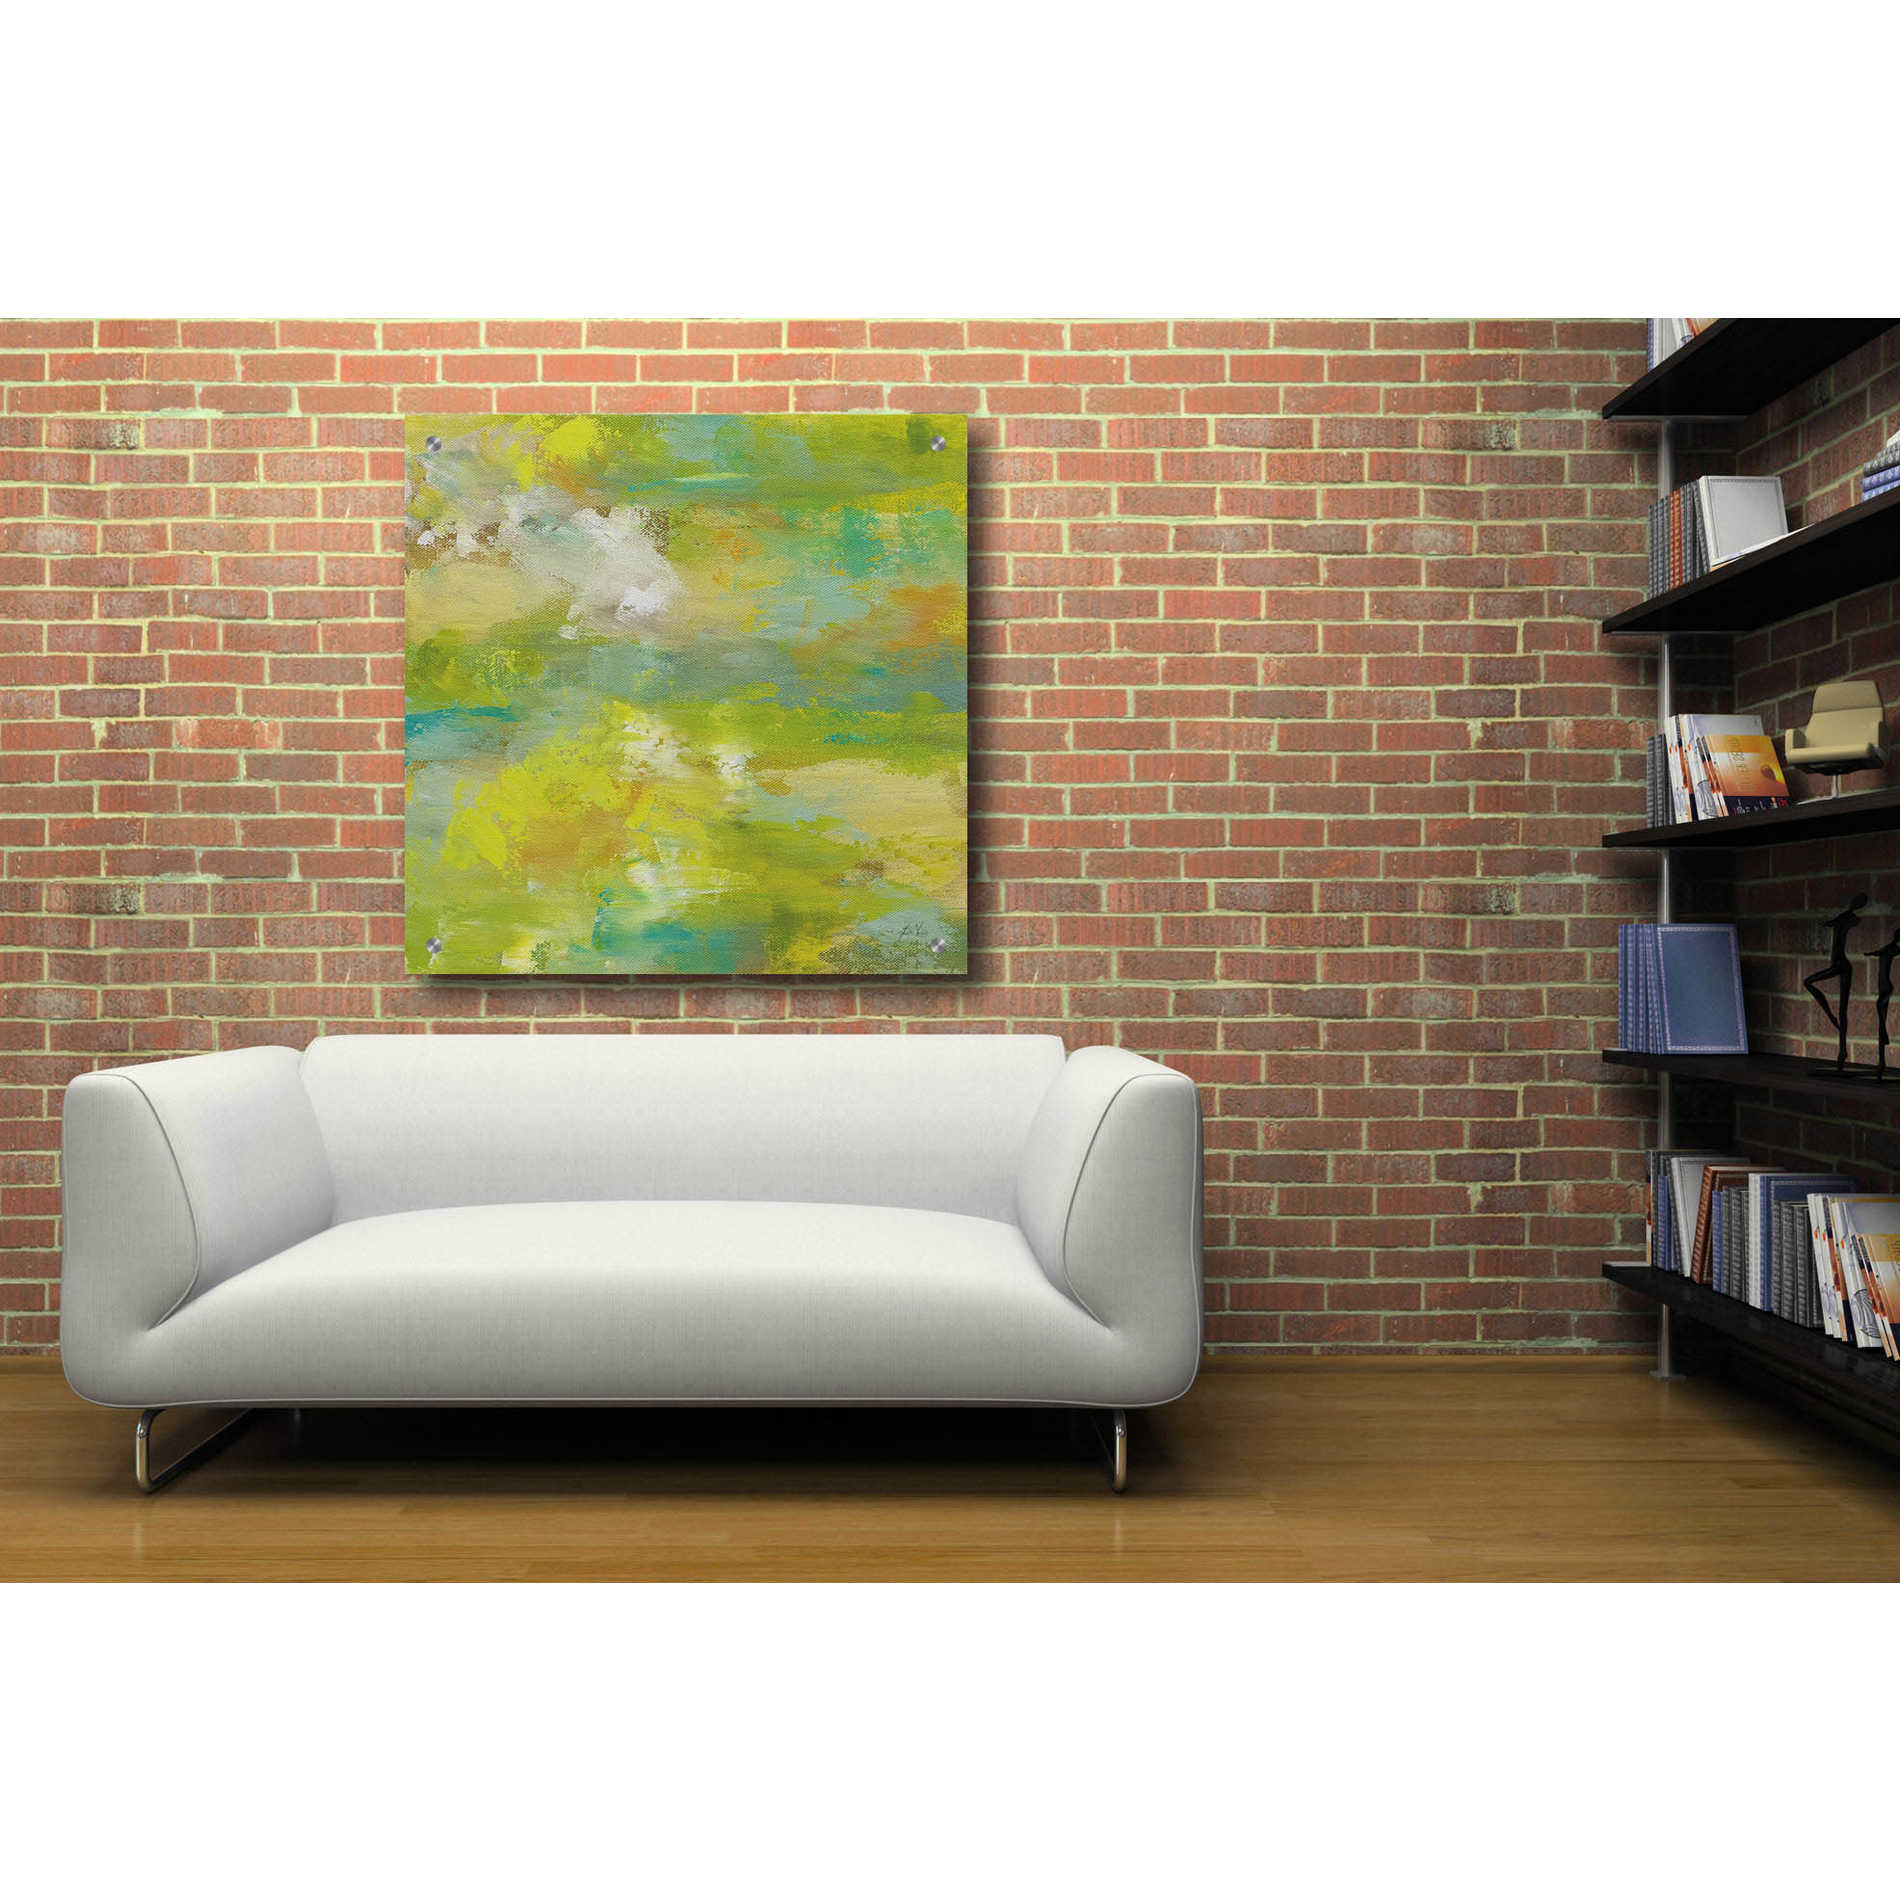 Epic Art 'Bliss' by Jeanette Vertentes, Acrylic Glass Wall Art,36x36